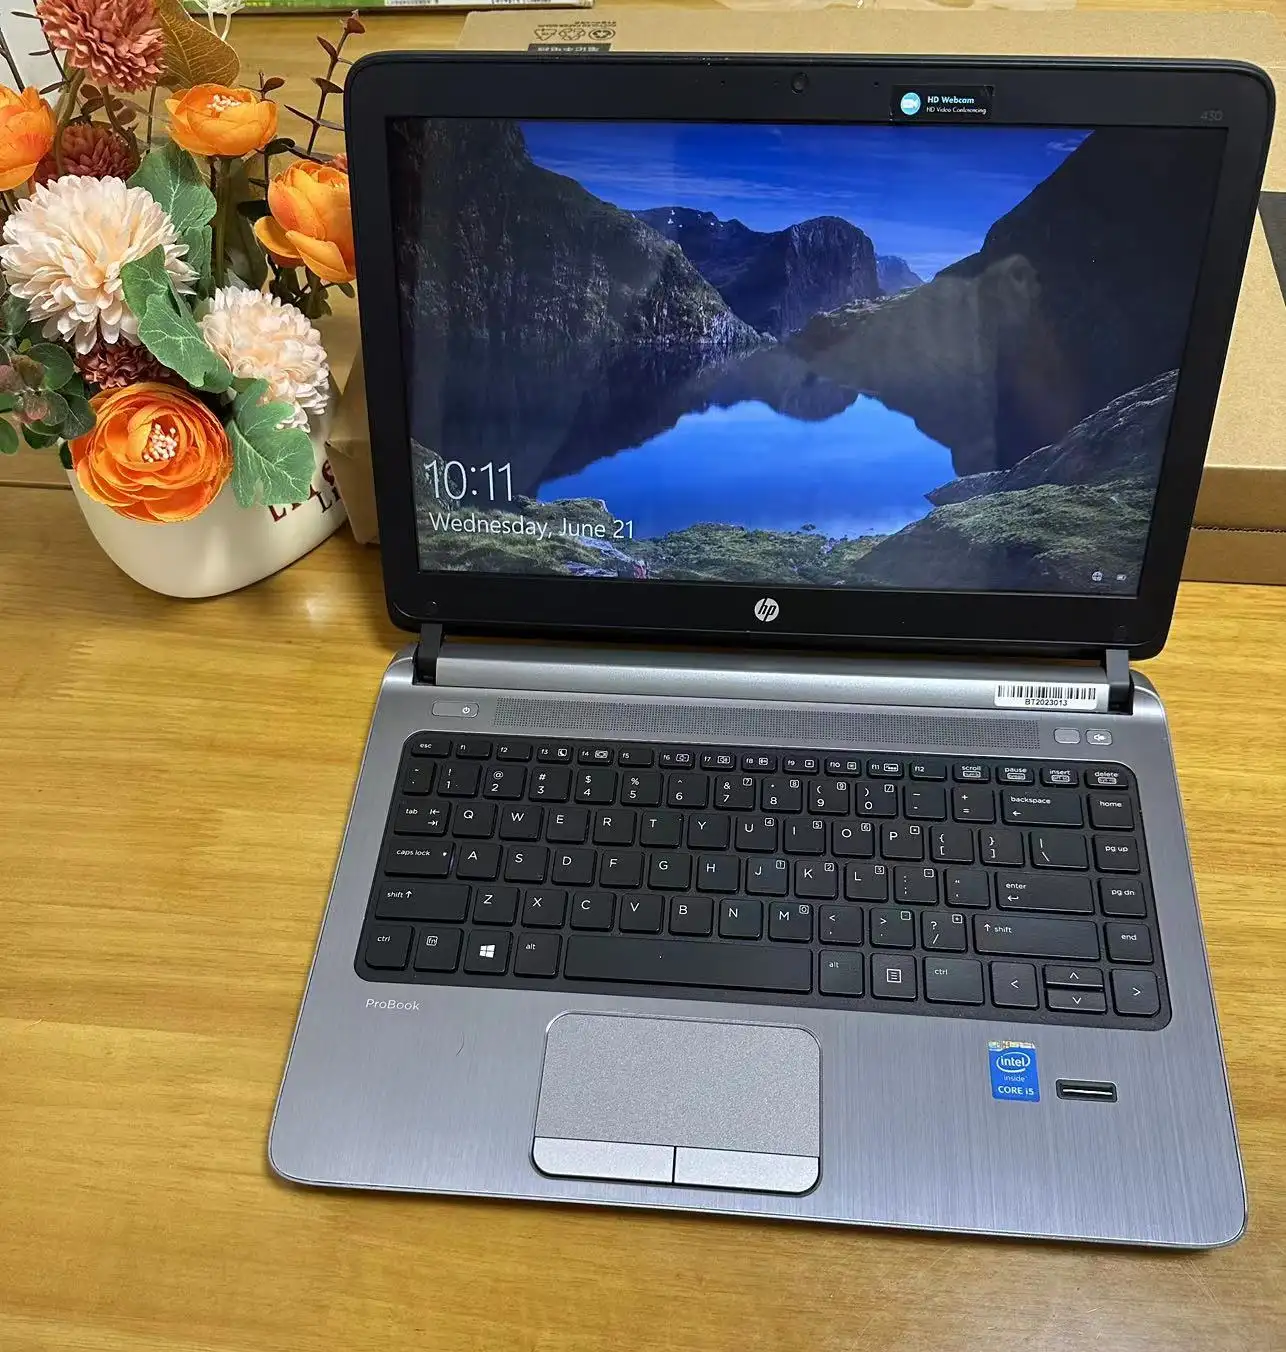 HP 430 G1 Used Laptops Core i5 4th Gen RAM 8GB HDD 500GB Win10 14-inch Second Hand Laptop Computer